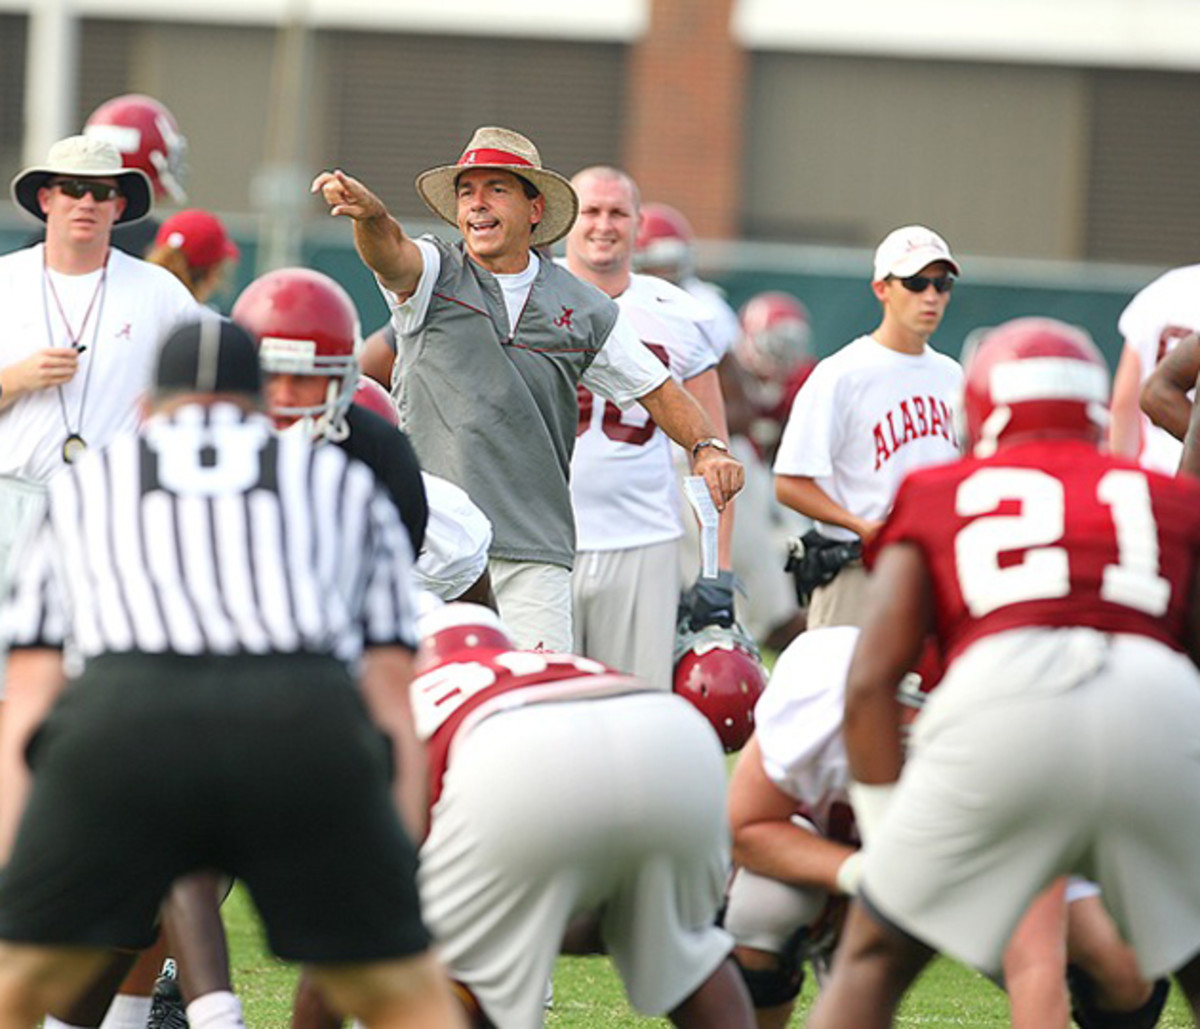 Upon his arrival, Saban toughened up the Crimson Tide through his staunch belief in "the journey."